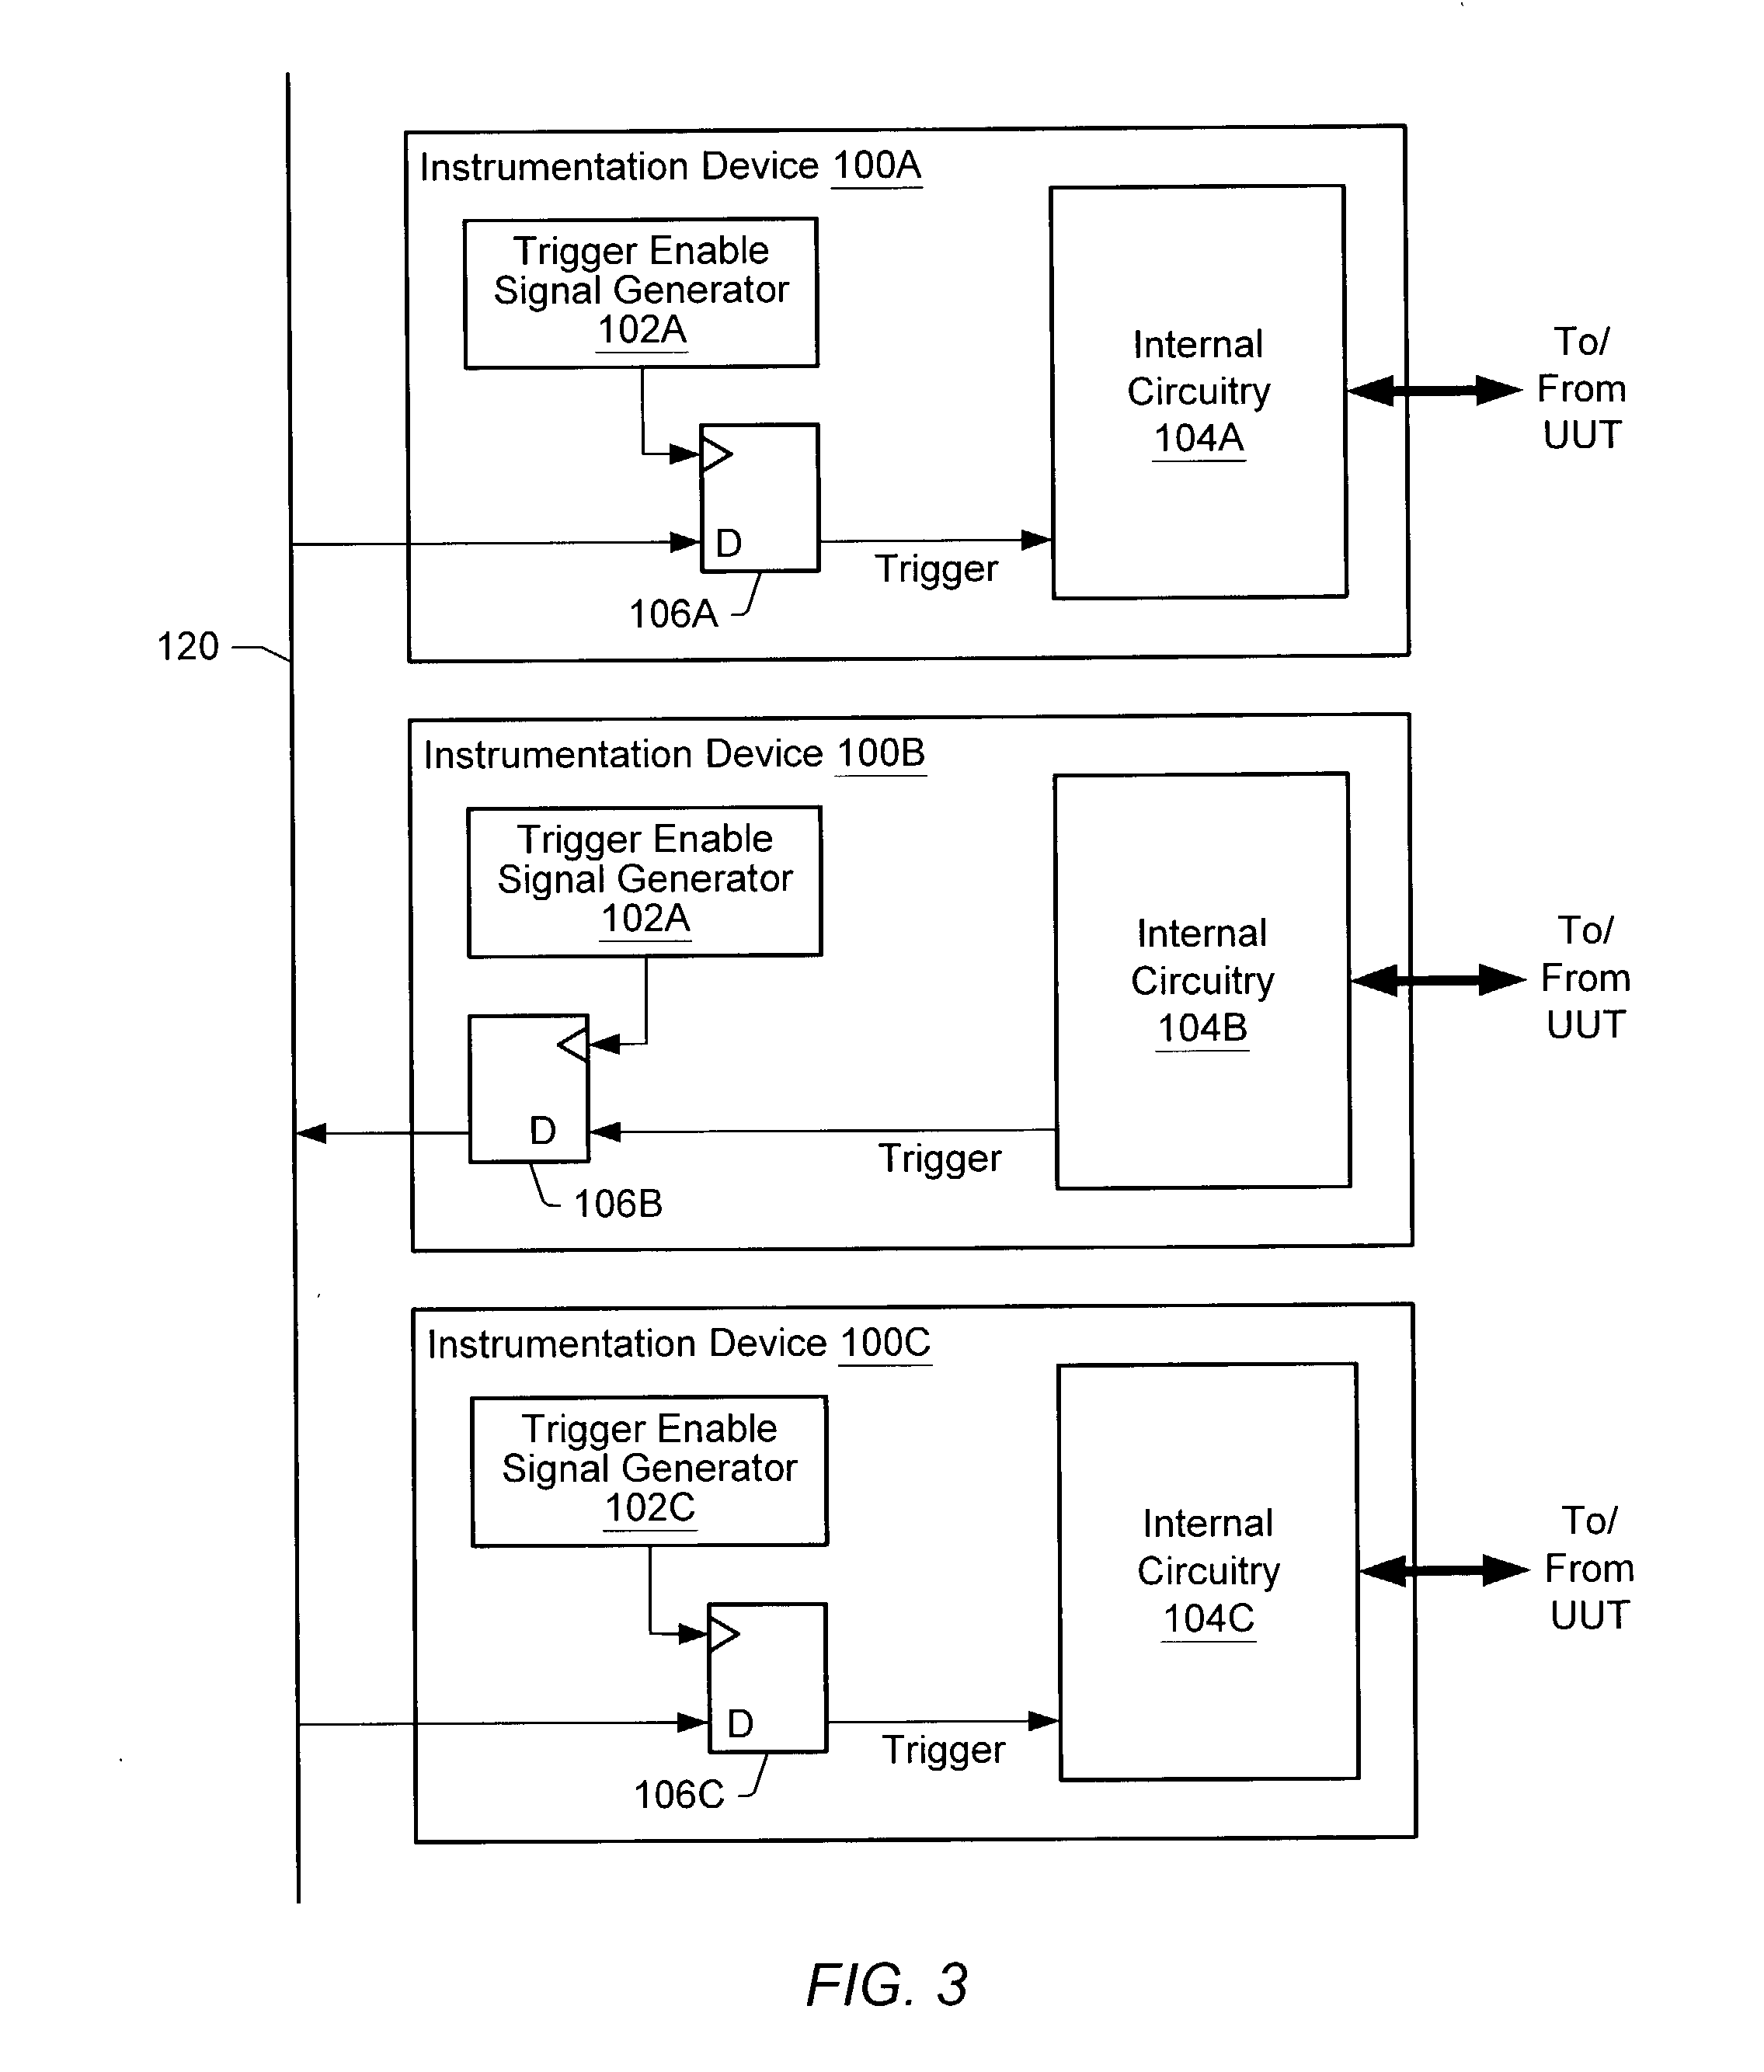 System and method for synchronizing multiple instrumentation devices